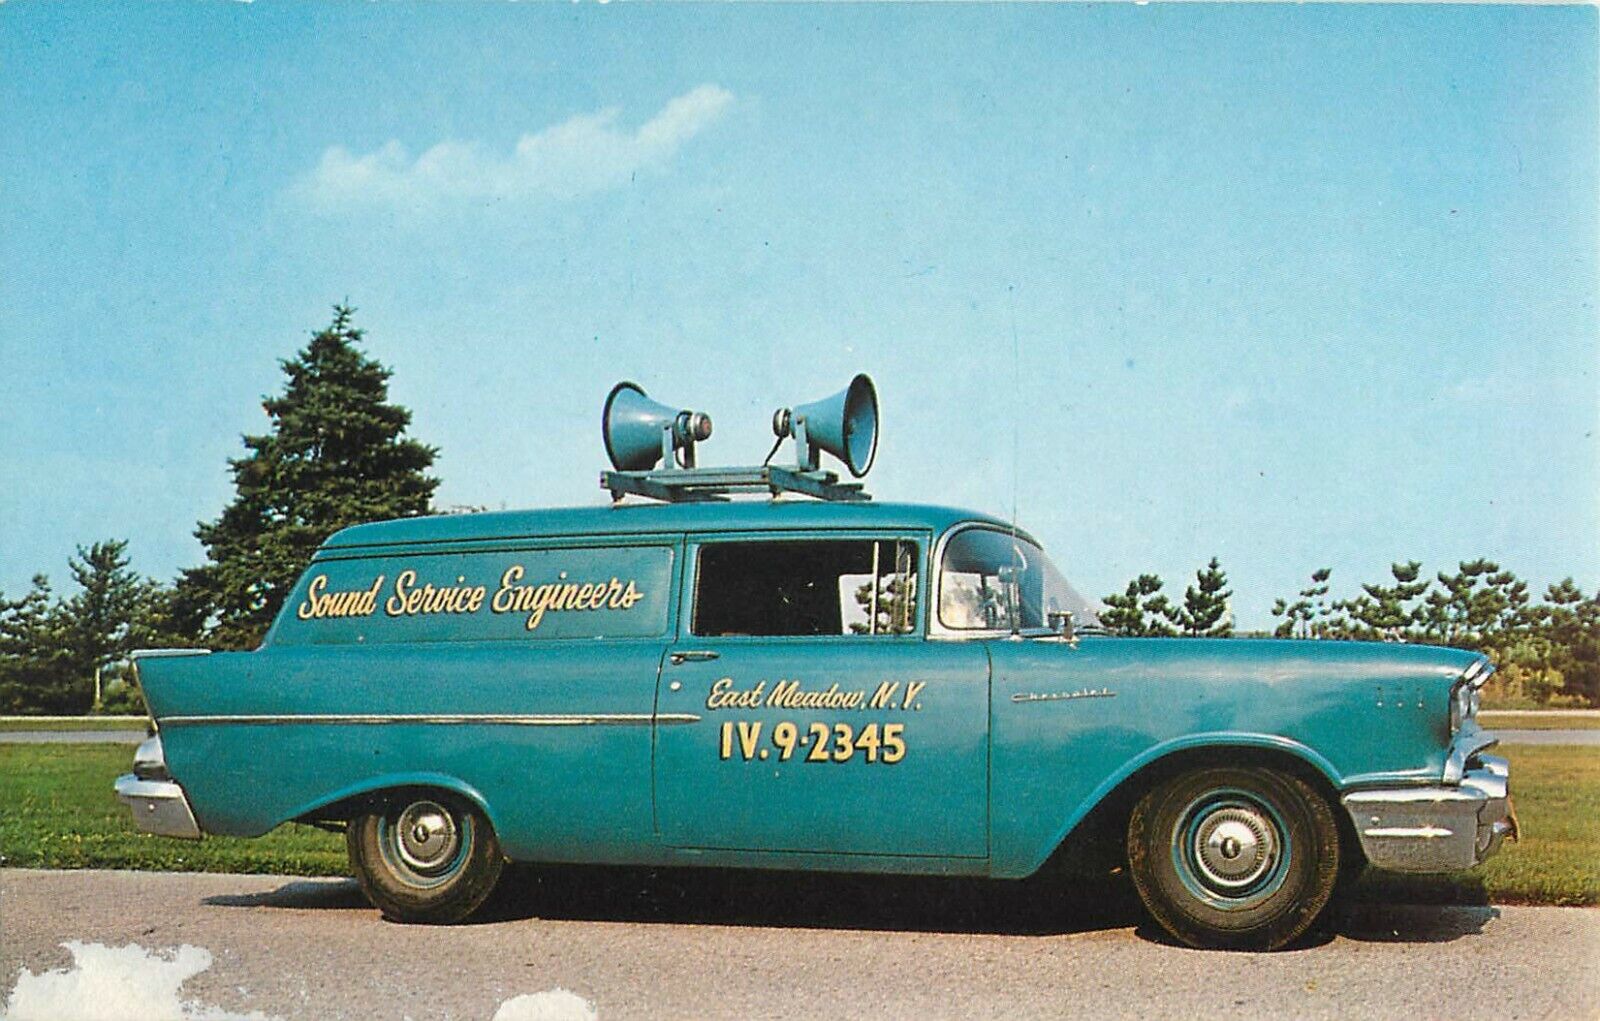 Sound Service Engineers Chevrolet Wagon Speakers Postcard East Meadow L. I. NY